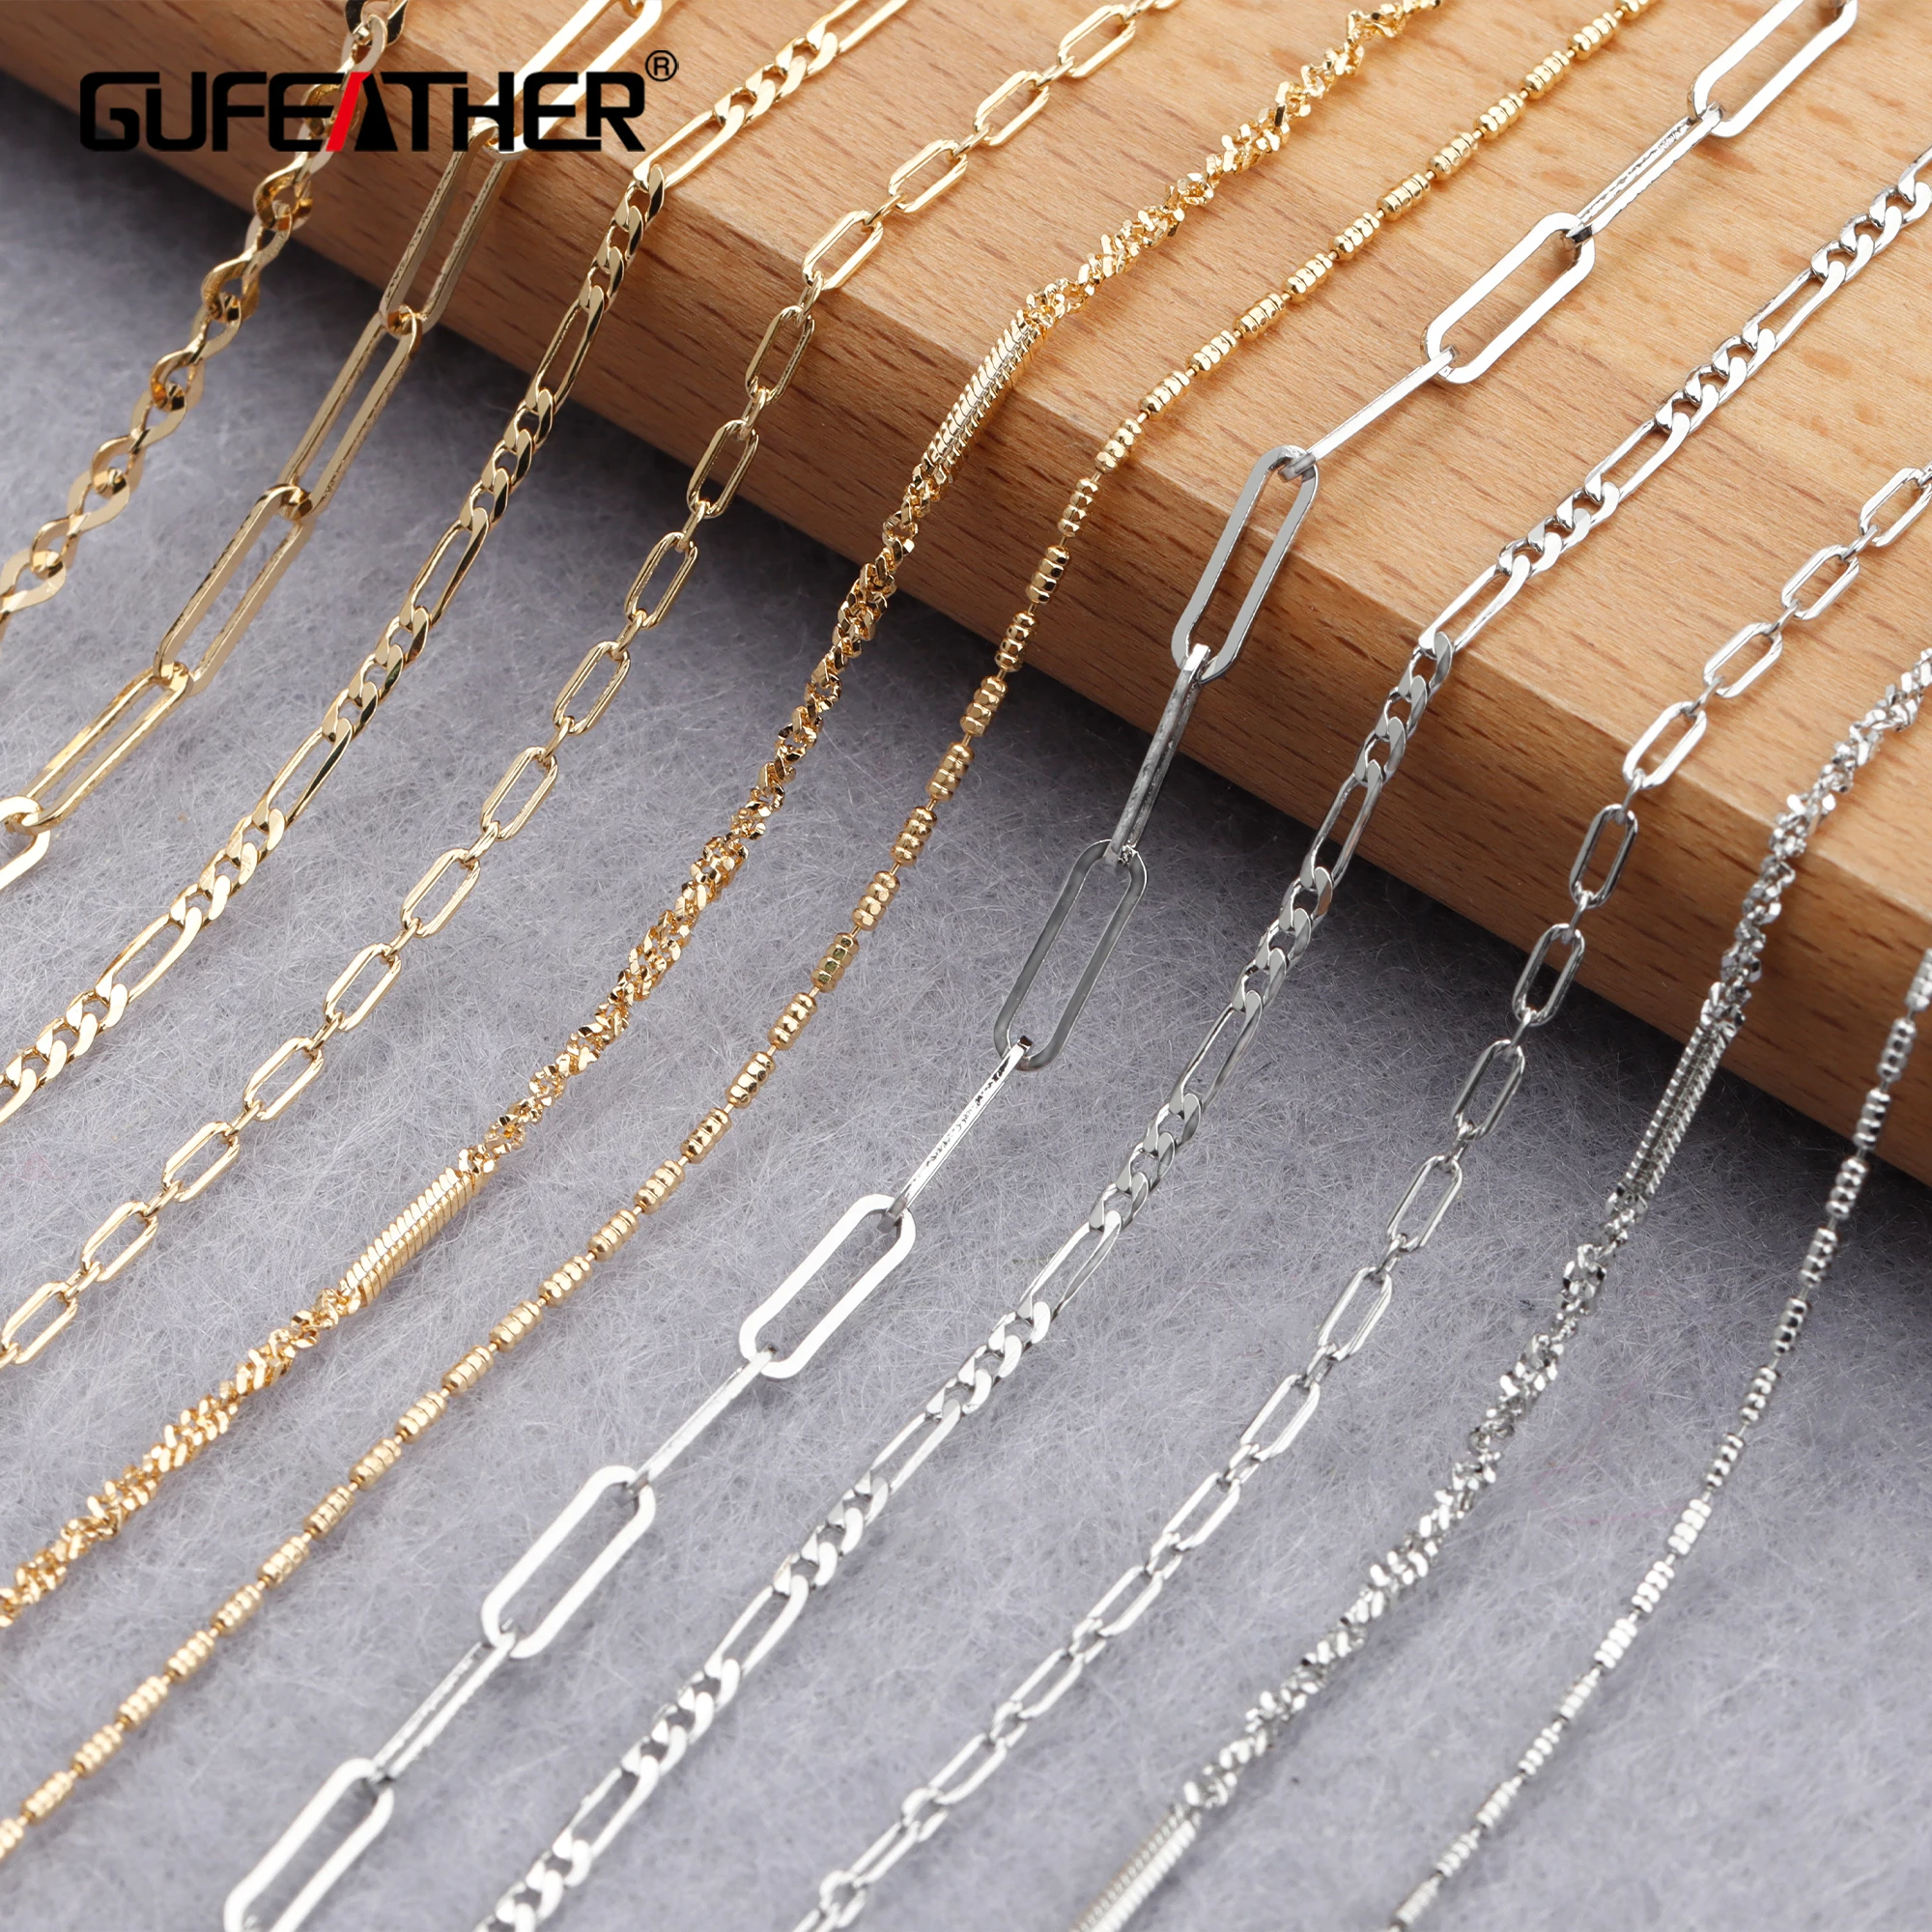 

GUFEATHER C154,diy chain,pass REACH,nickel free,18k gold rhodium plated,copper,charm,diy bracelet necklace,jewelry making,3m/lot